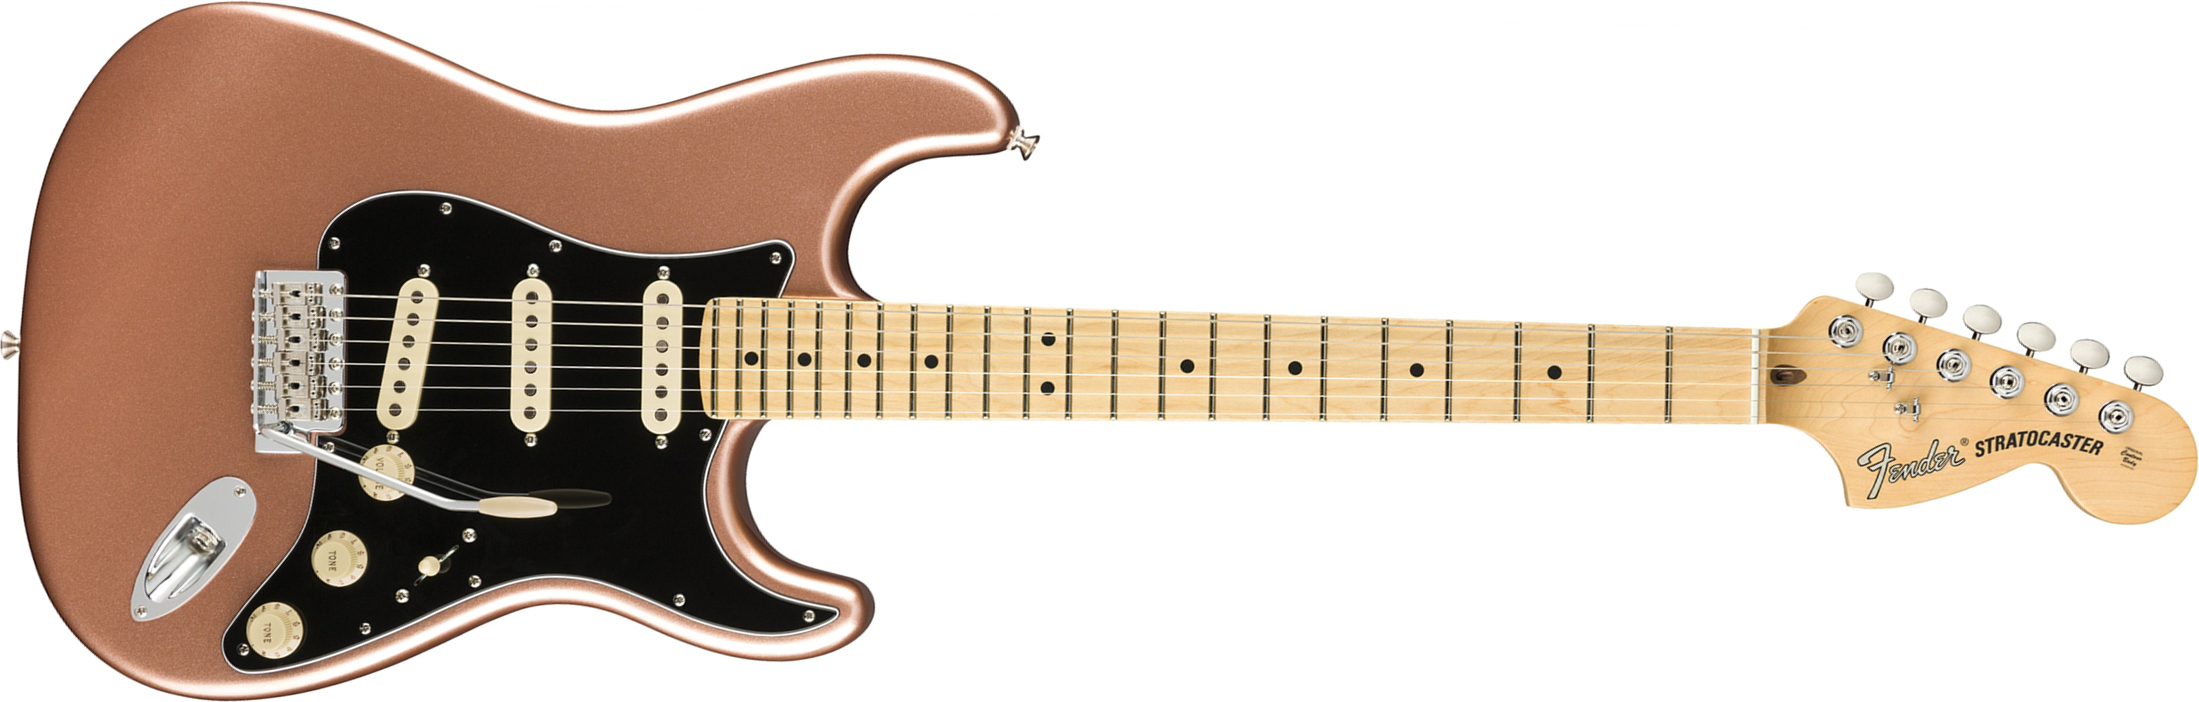 Fender Strat American Performer Usa Sss Mn - Penny - Guitare Électrique Forme Str - Main picture